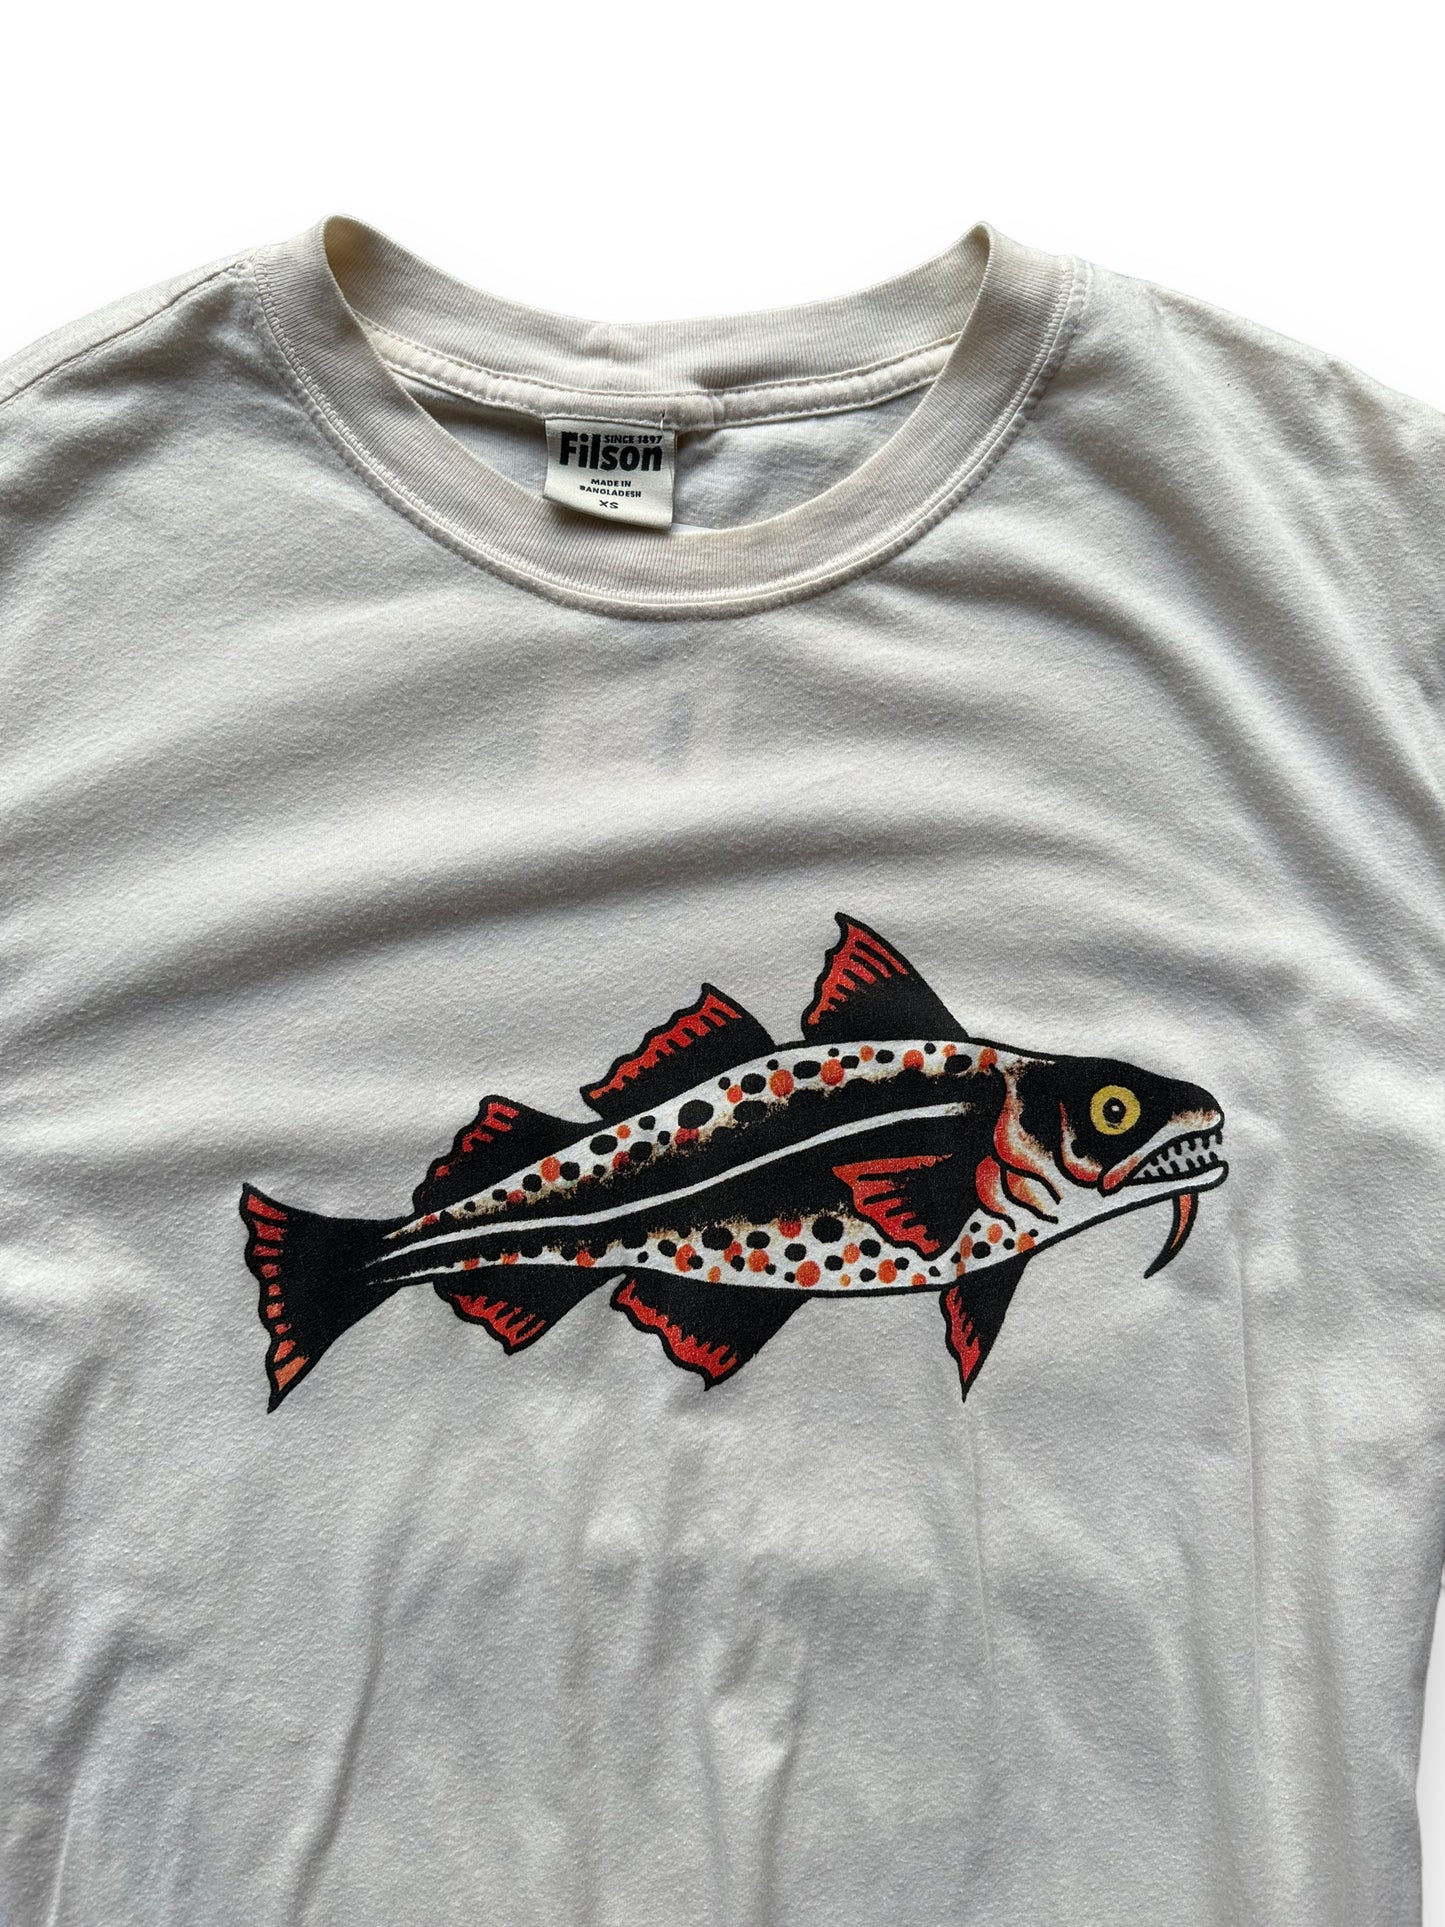 Tag View of Filson Fish Graphic Tee SZ XS |  Barn Owl Vintage Goods | Vintage Filson Workwear Seattle